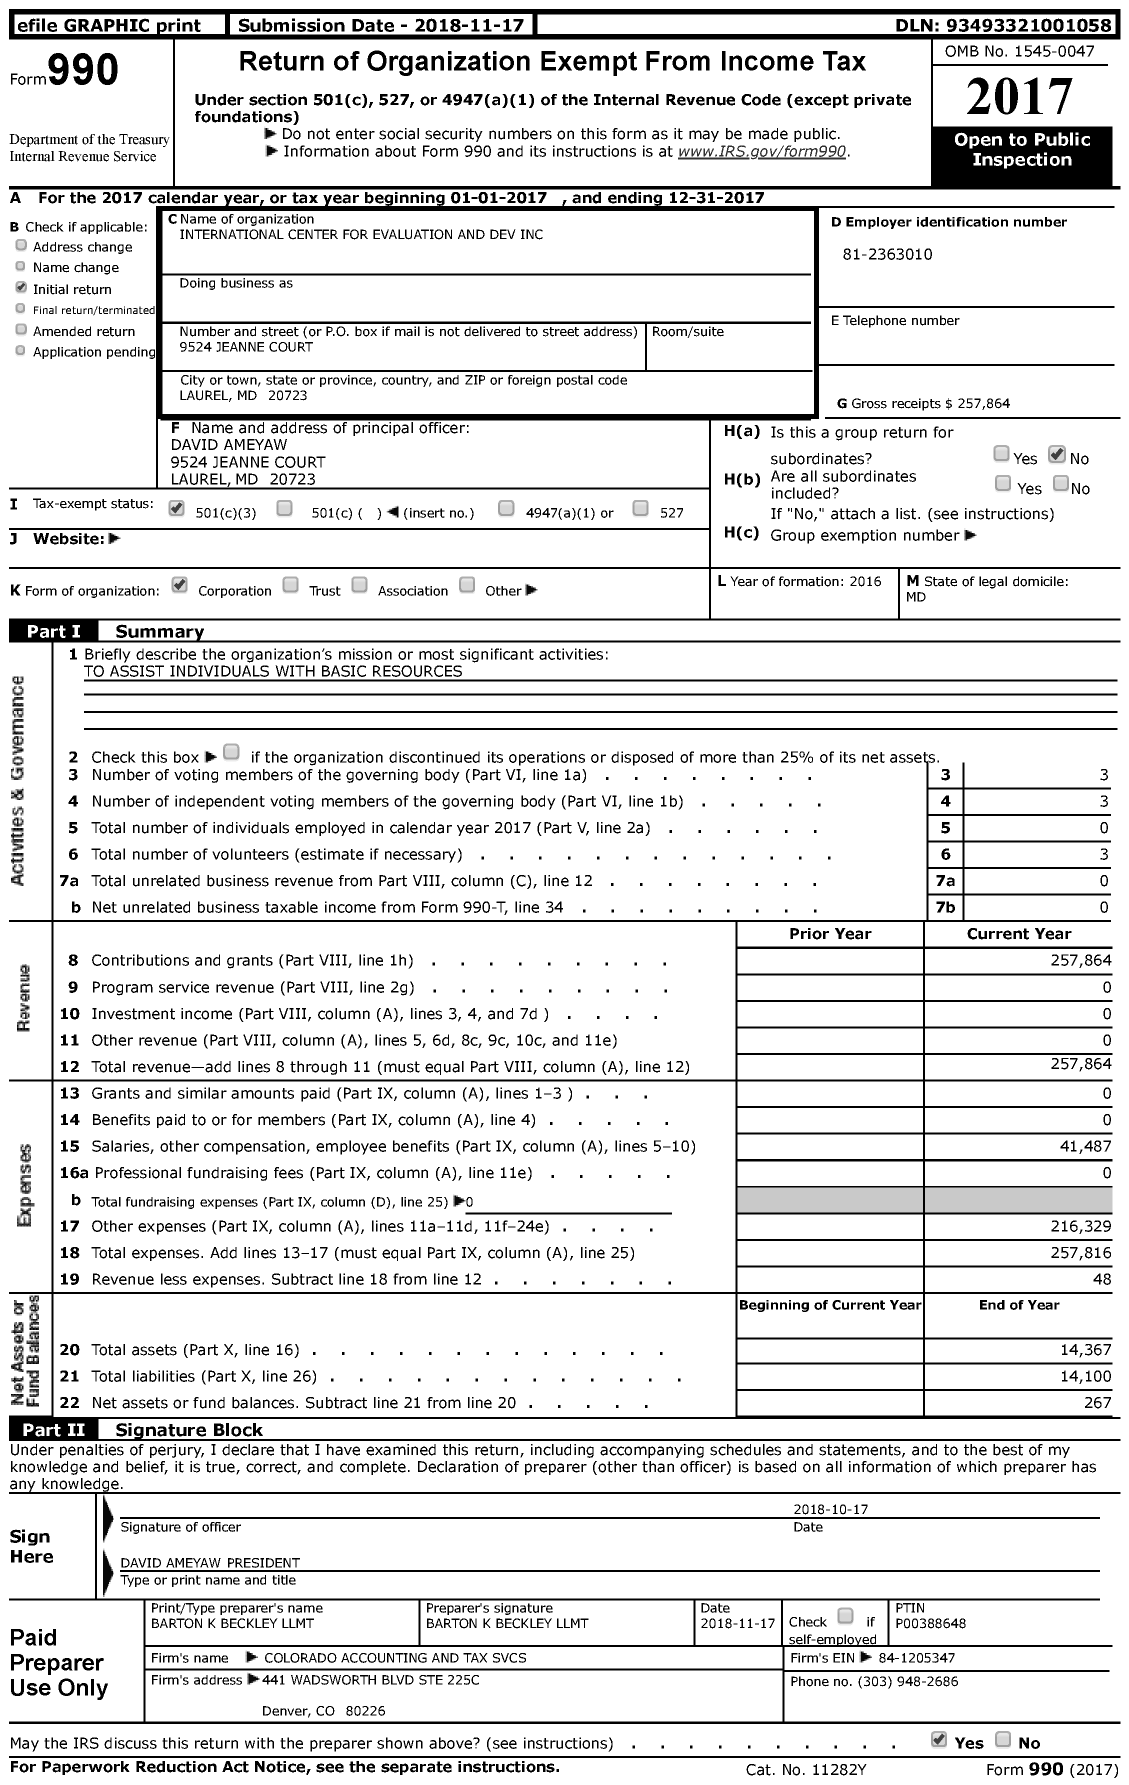 Image of first page of 2017 Form 990 for Not for Profit / International Center for Evaluation and Dev Inc